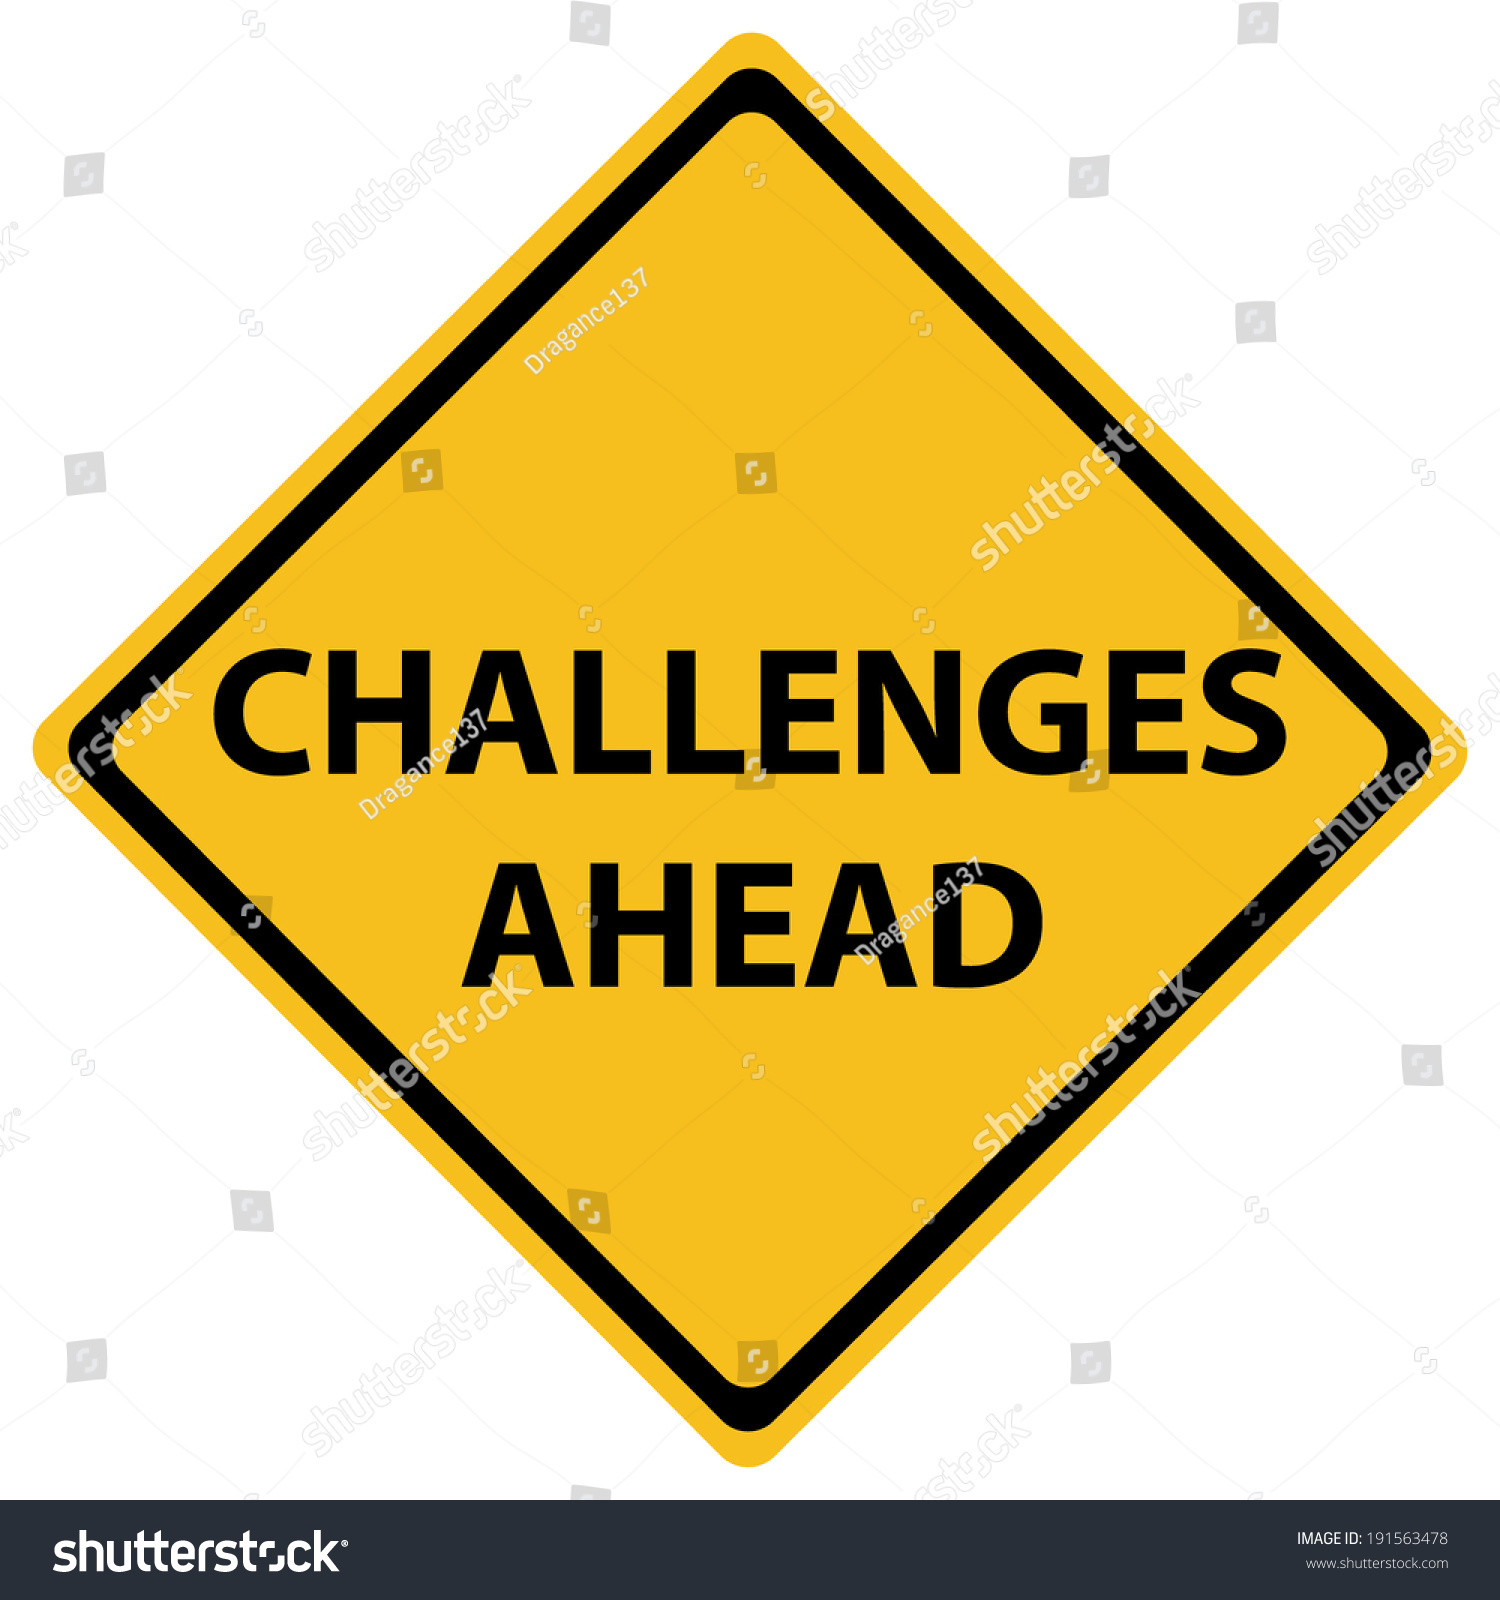 Challenges Ahead Road Sign Illustration Design Stock Vector 191563478